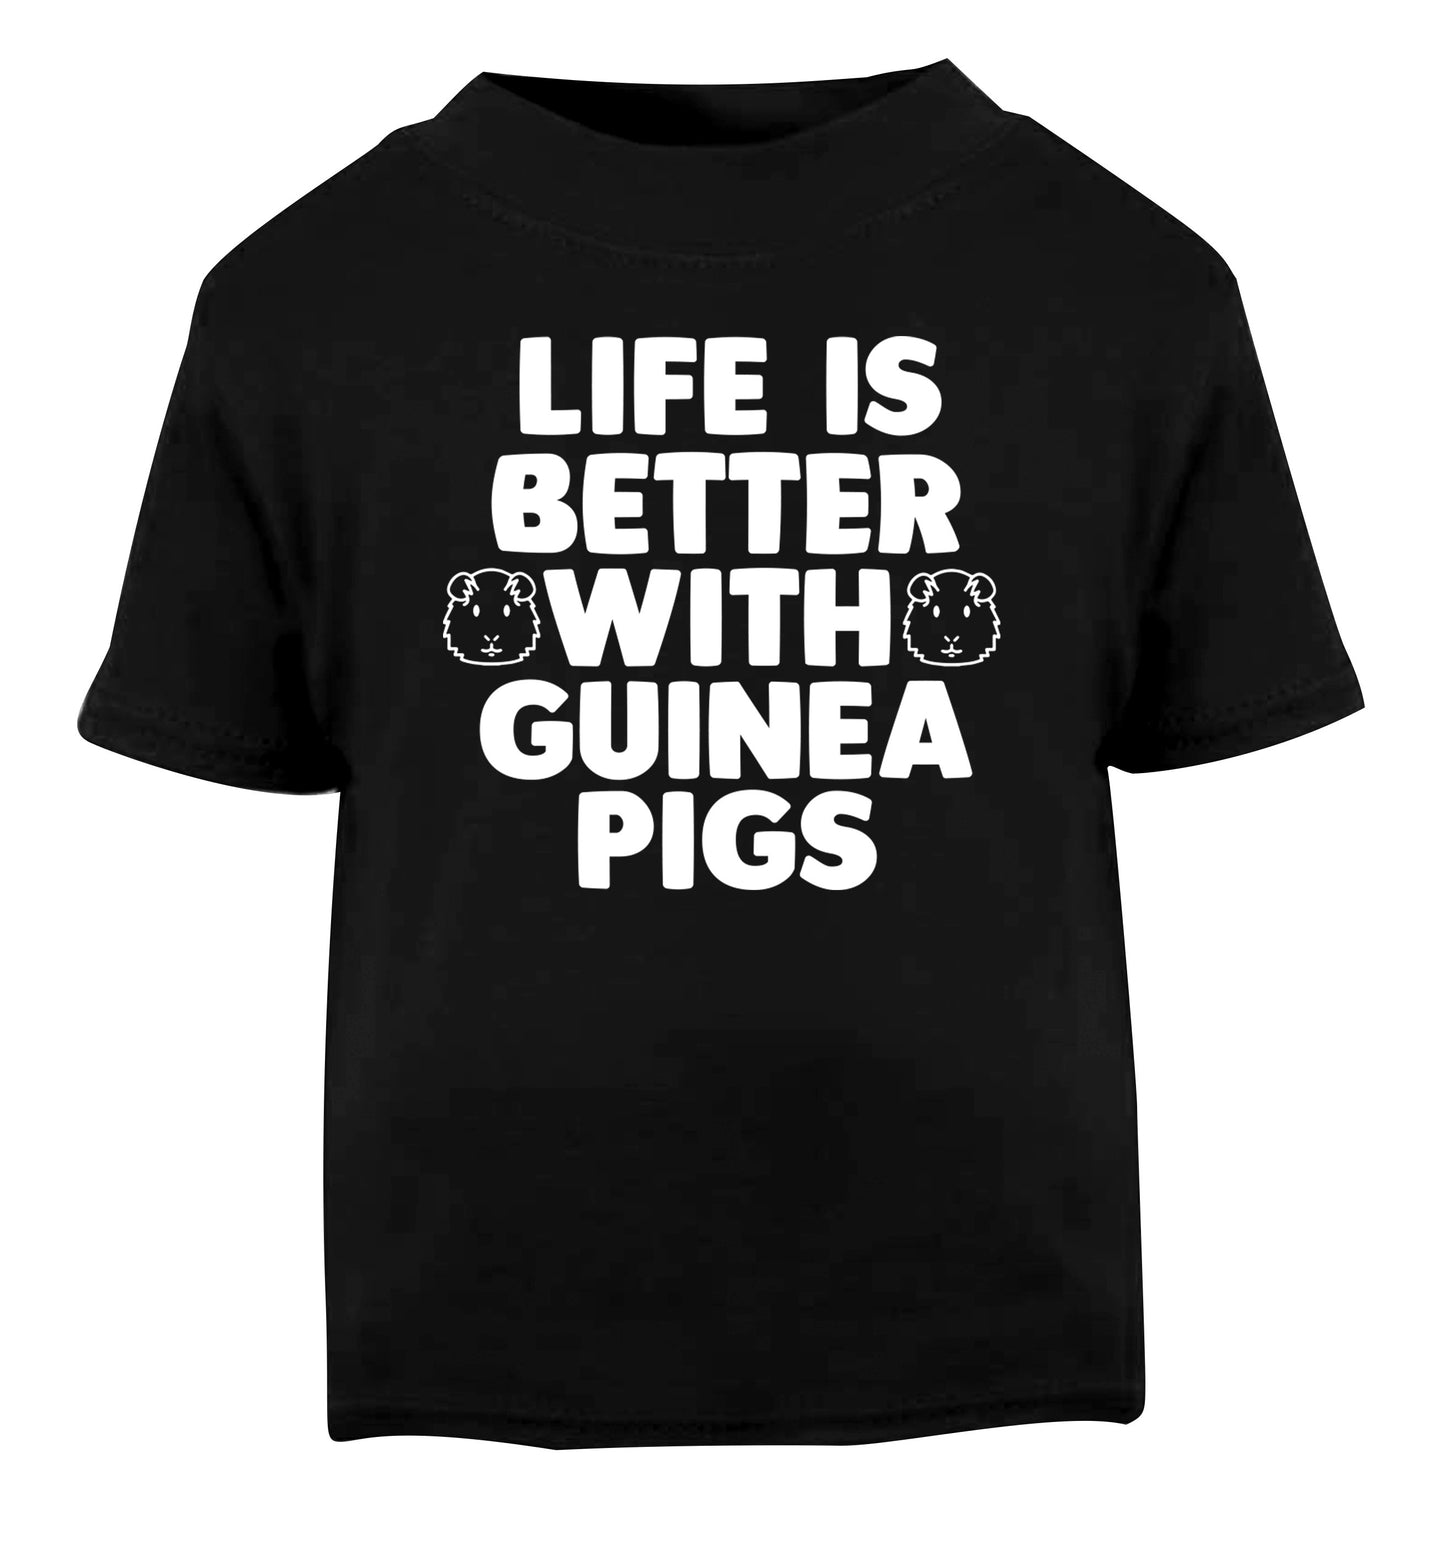 Life is better with guinea pigs Black Baby Toddler Tshirt 2 years